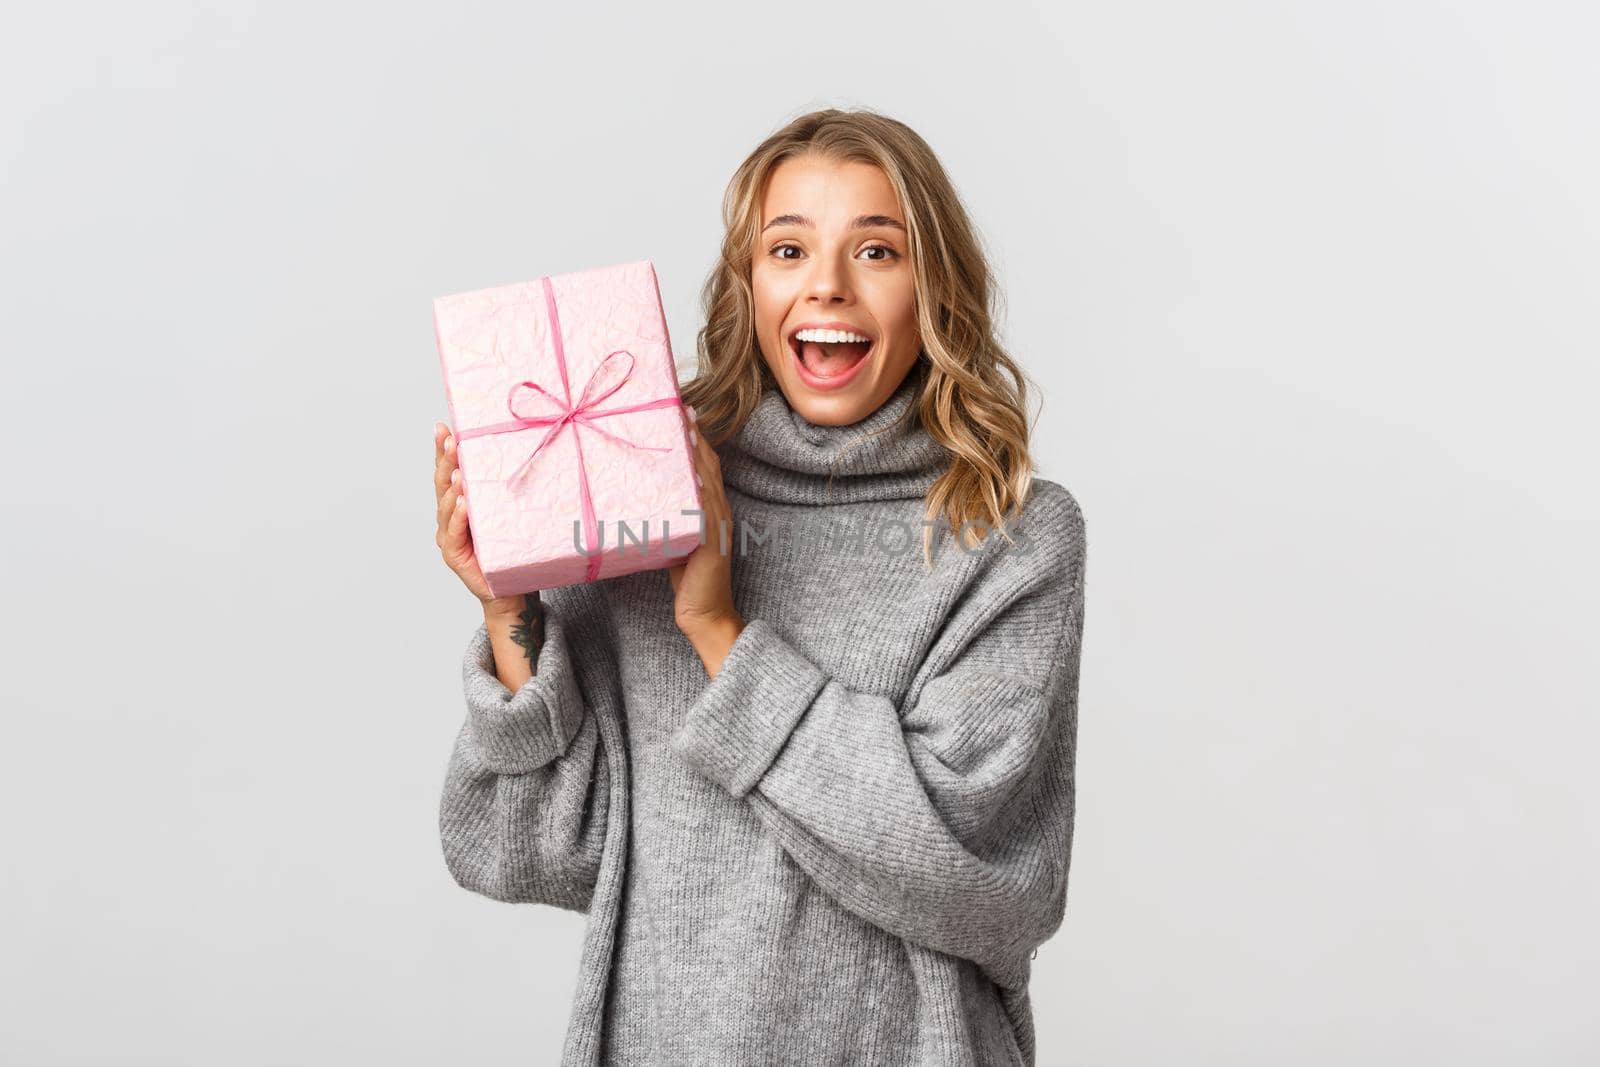 Portrait of attractive blond girl in grey sweater, looking happy, receiving birthday gift in pink box, standing over white background.